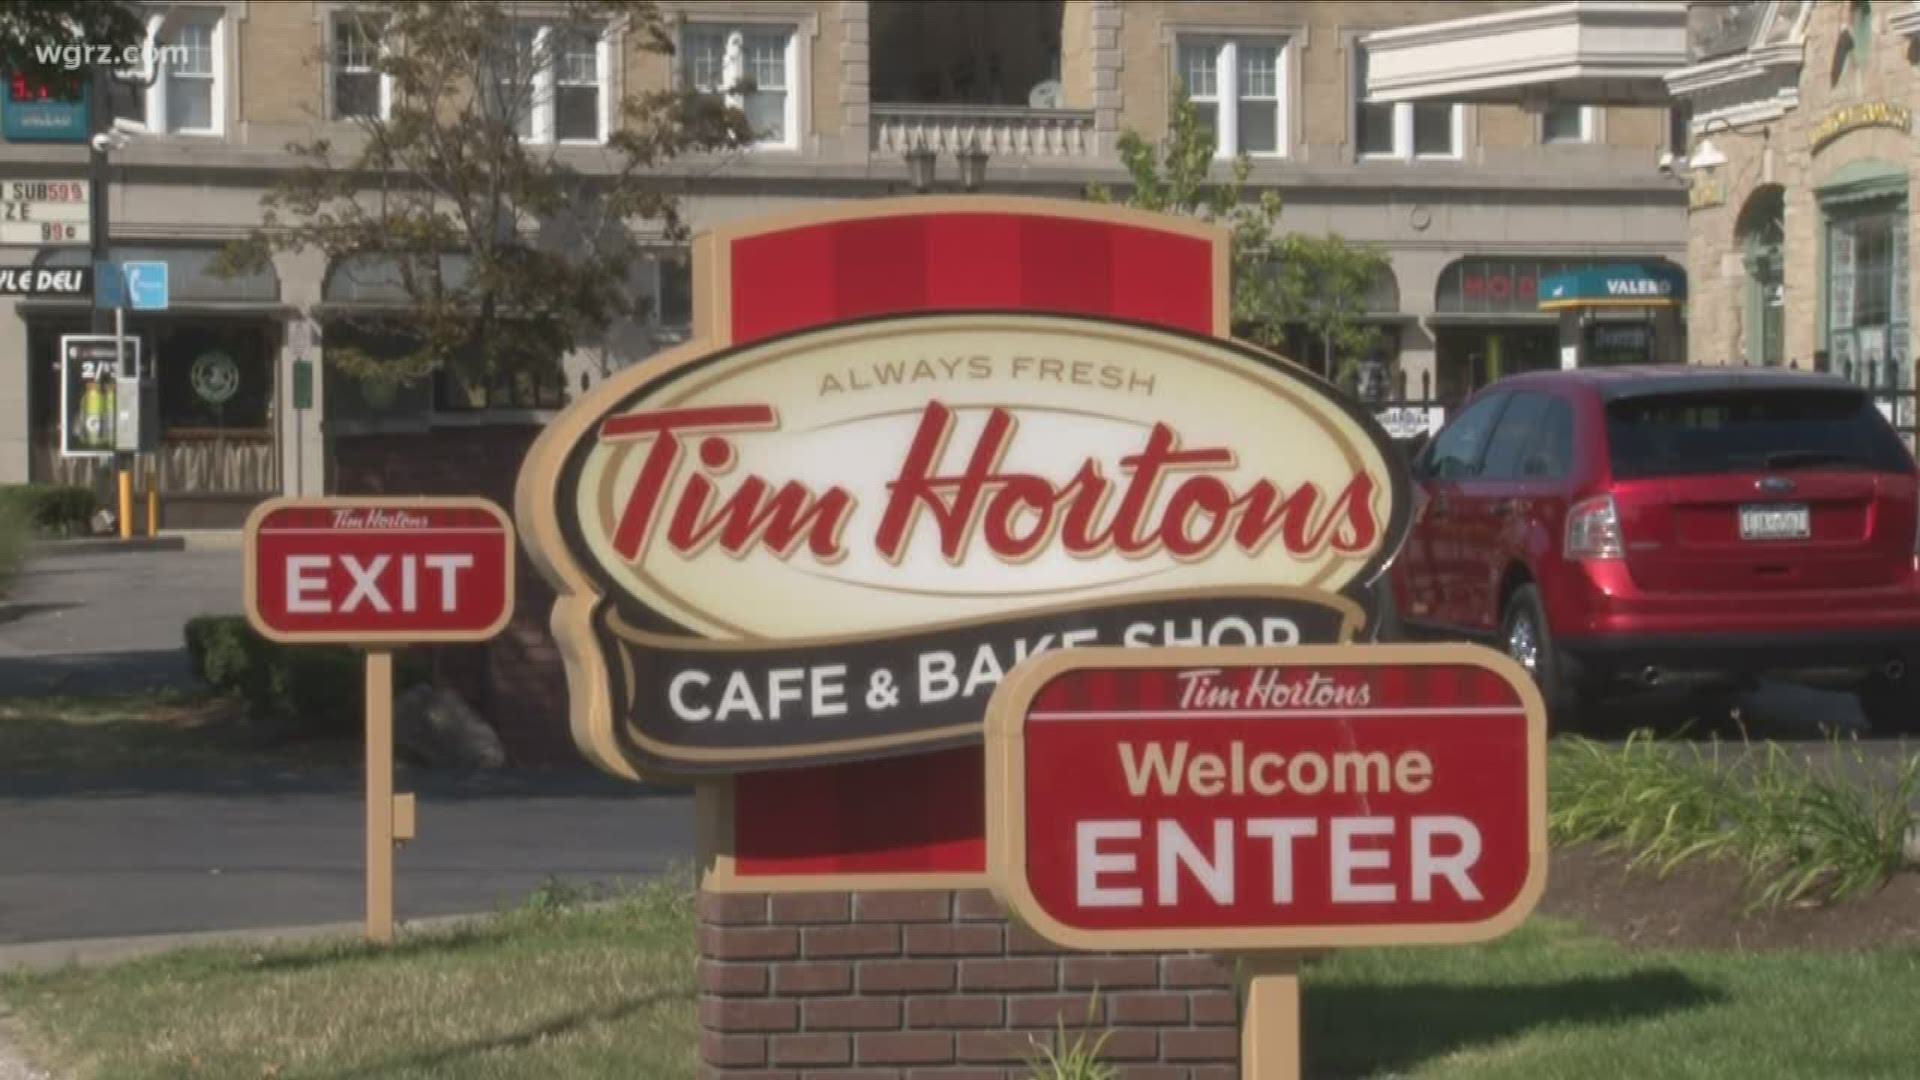 The coffee chain is hosting free rewards Saturday and Sunday if you purchase an item through the Tims Rewards mobile app.